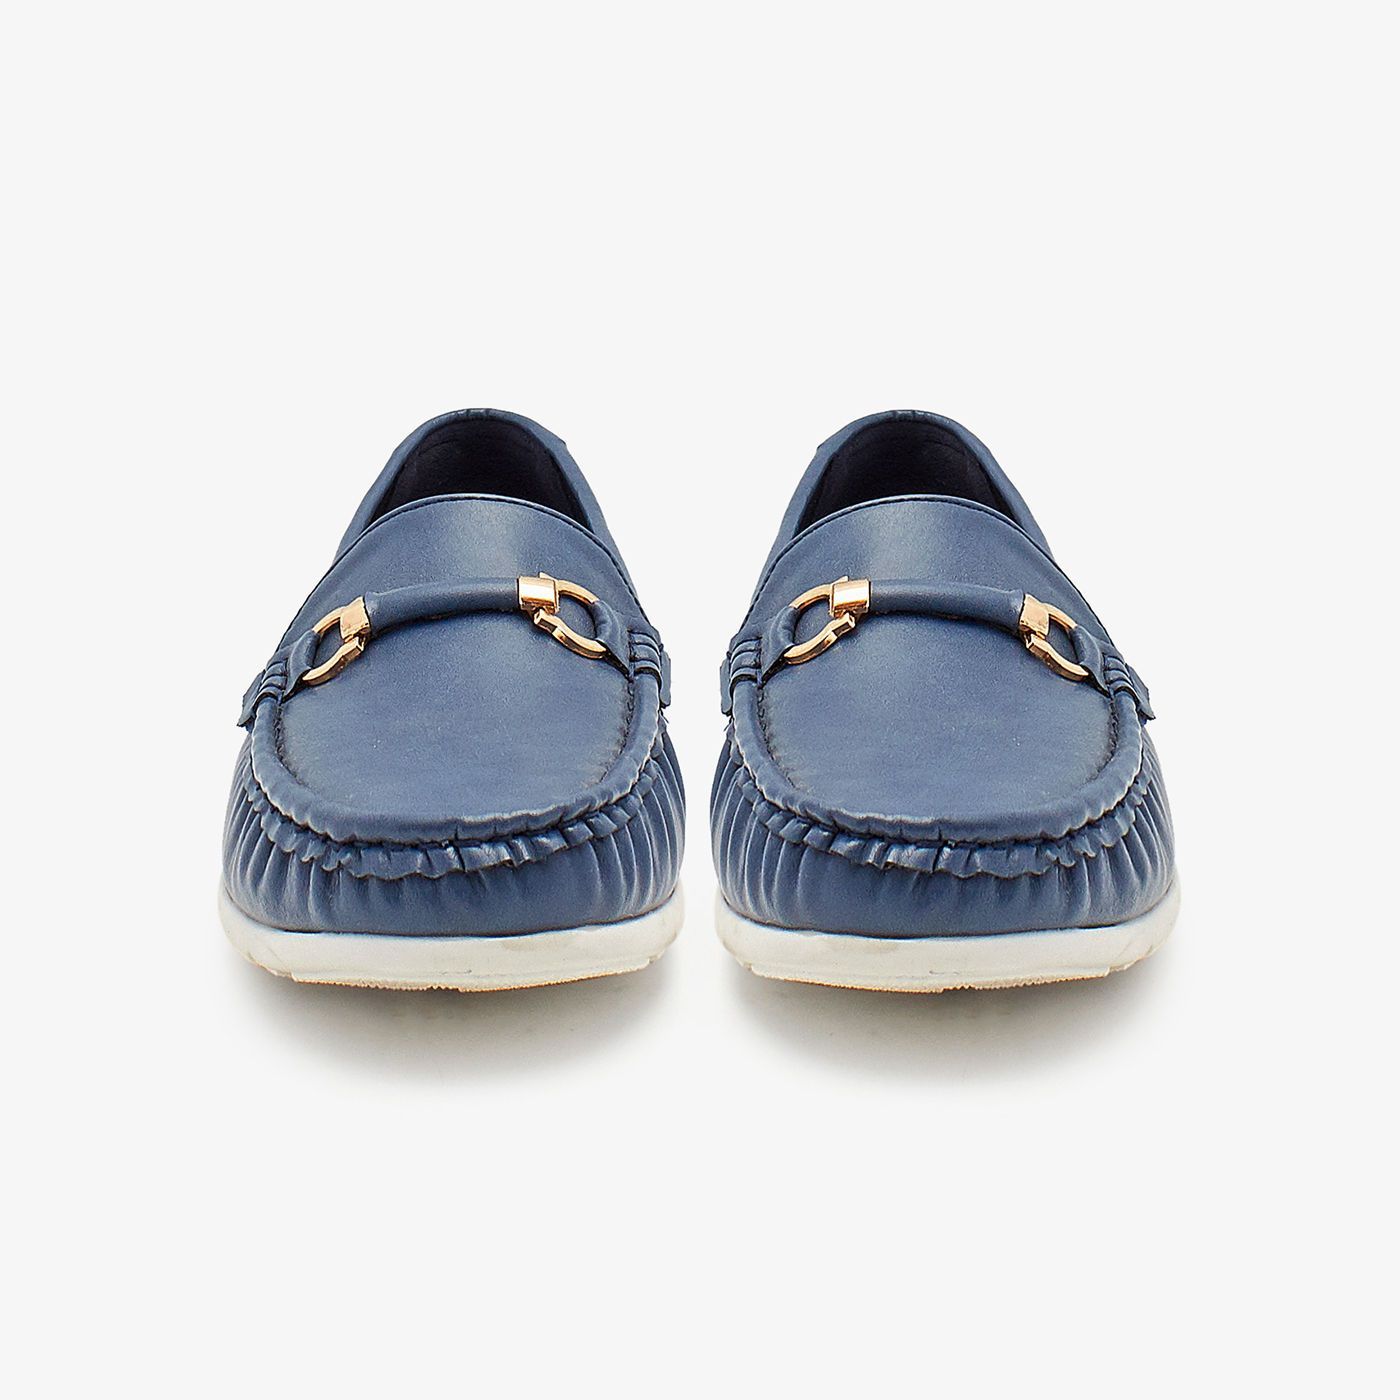 loafer shoes online shopping